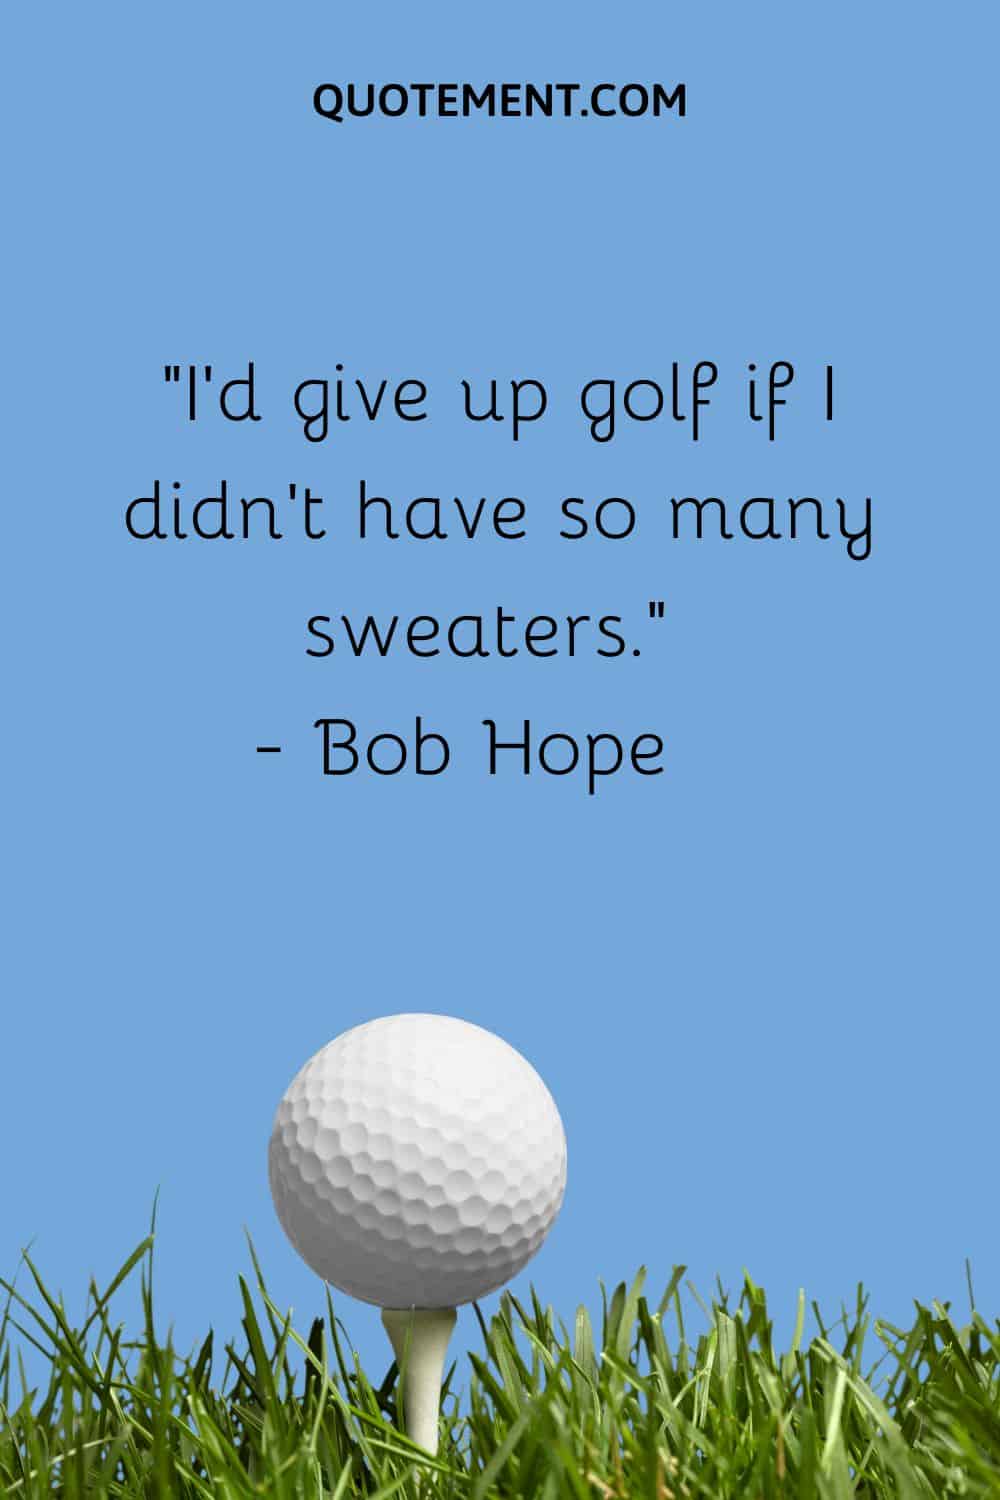 I’d give up golf if I didn’t have so many sweaters